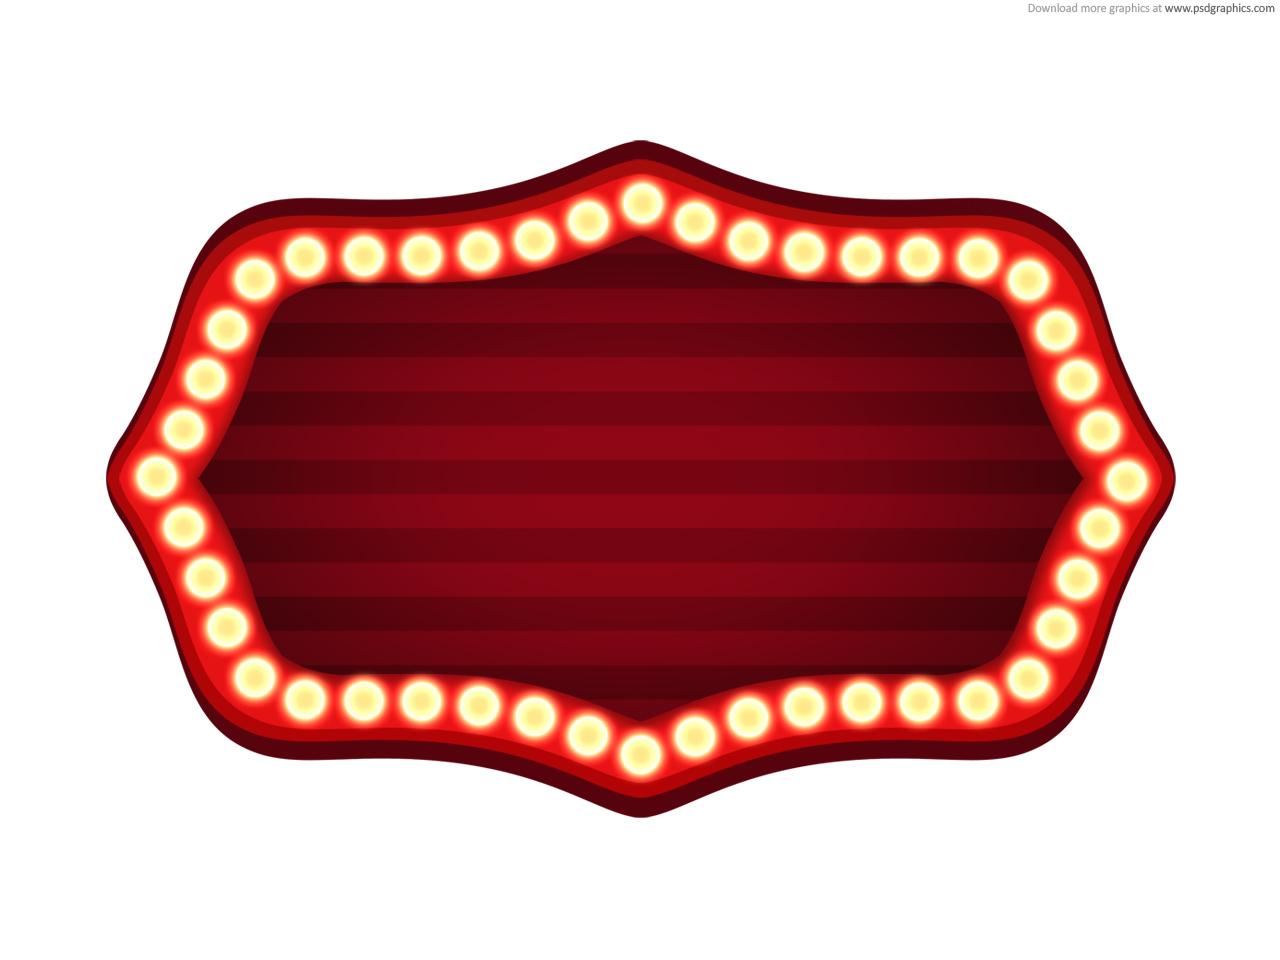 movie theater sign clipart box